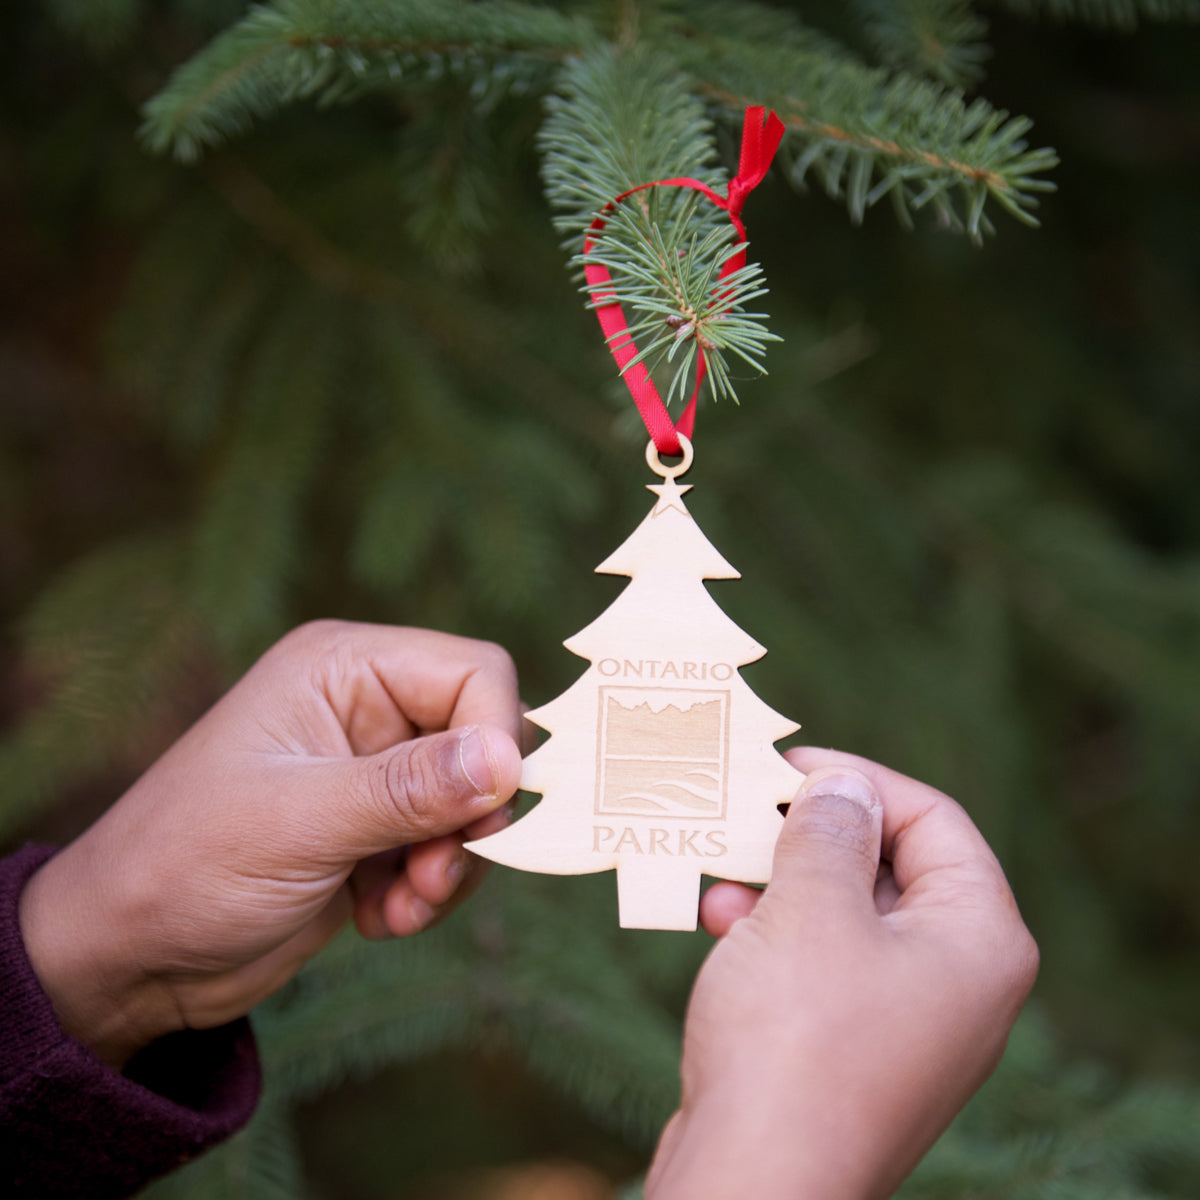 Child hanging ornament on pine tree. Ornament is tree shaped with star on top, Ontario Parks logo engraved in center with red ribbon